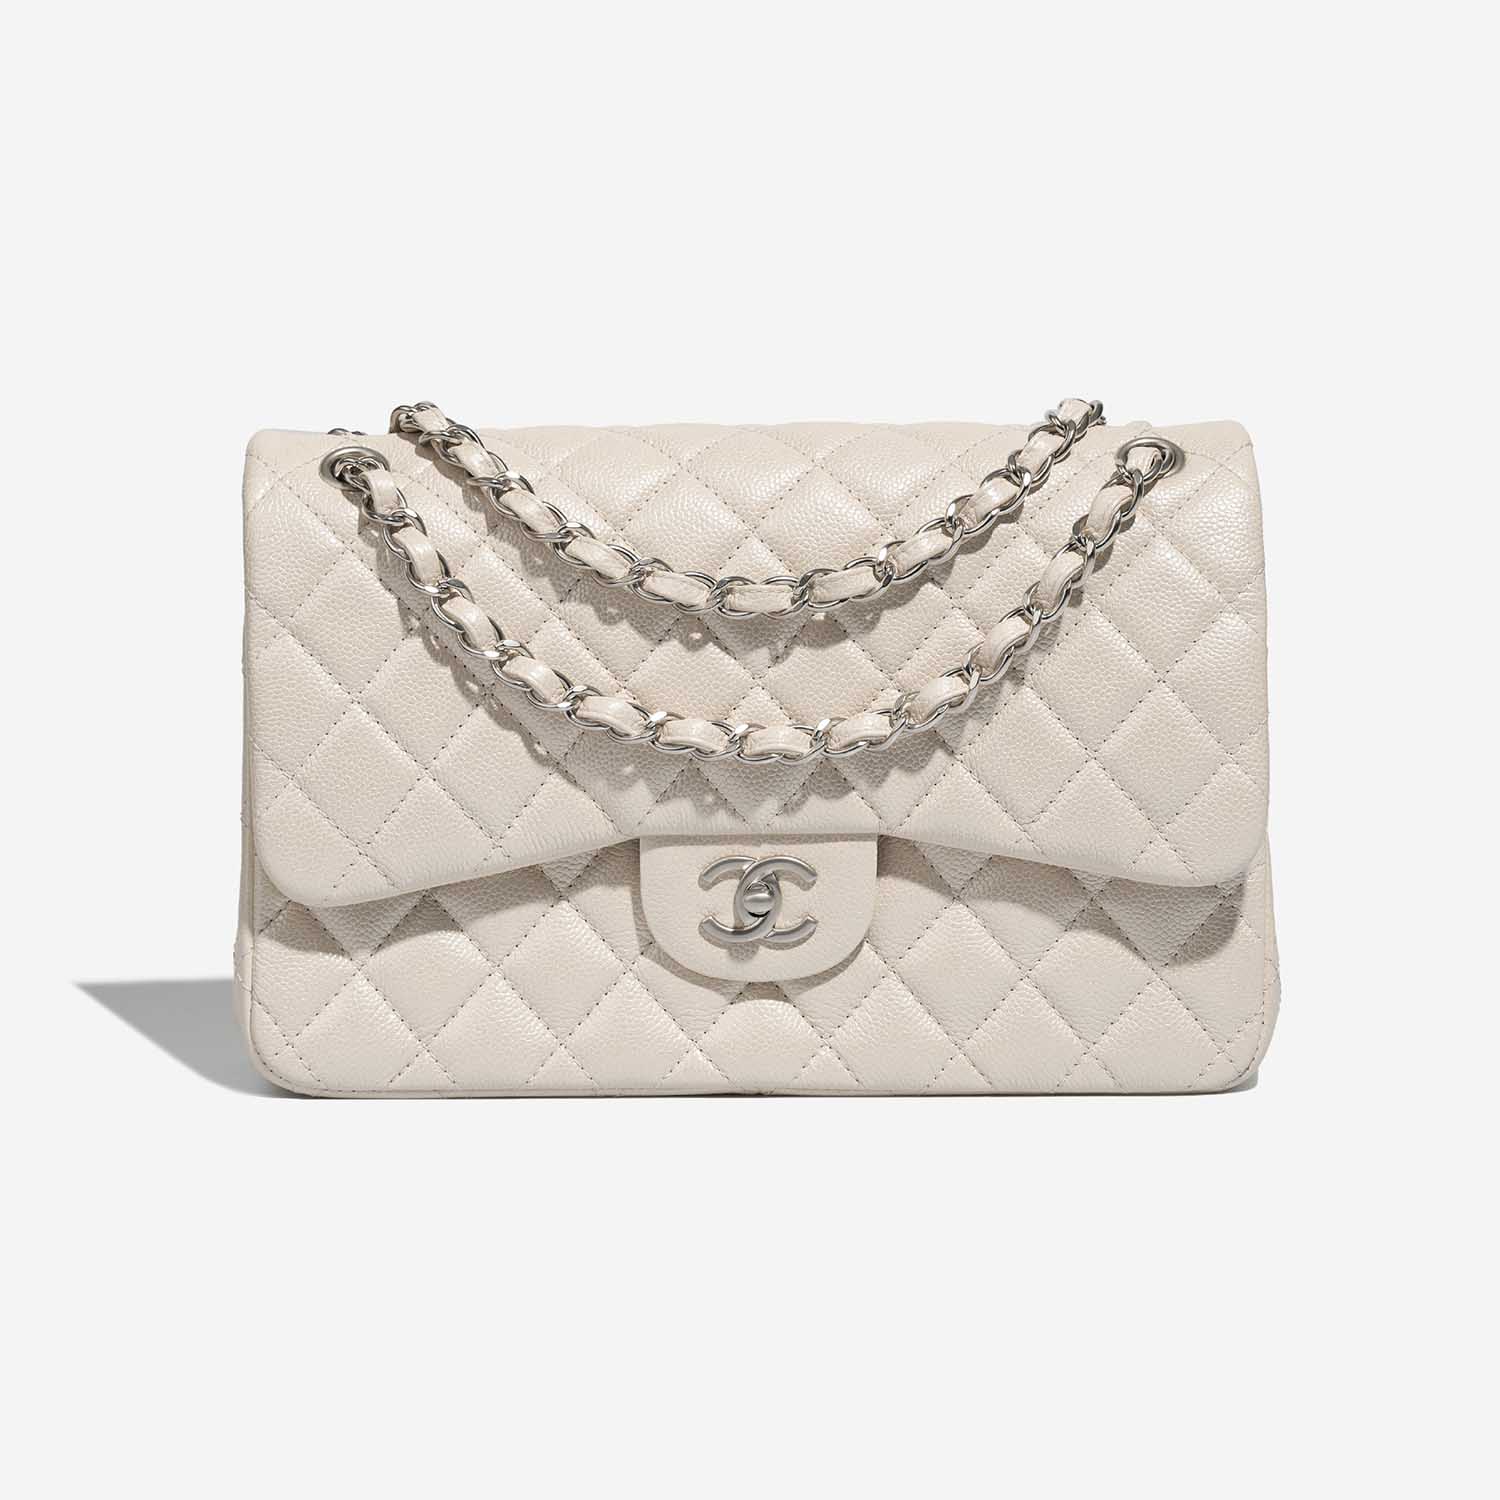 Timeless/classique leather handbag Chanel White in Leather - 37179745